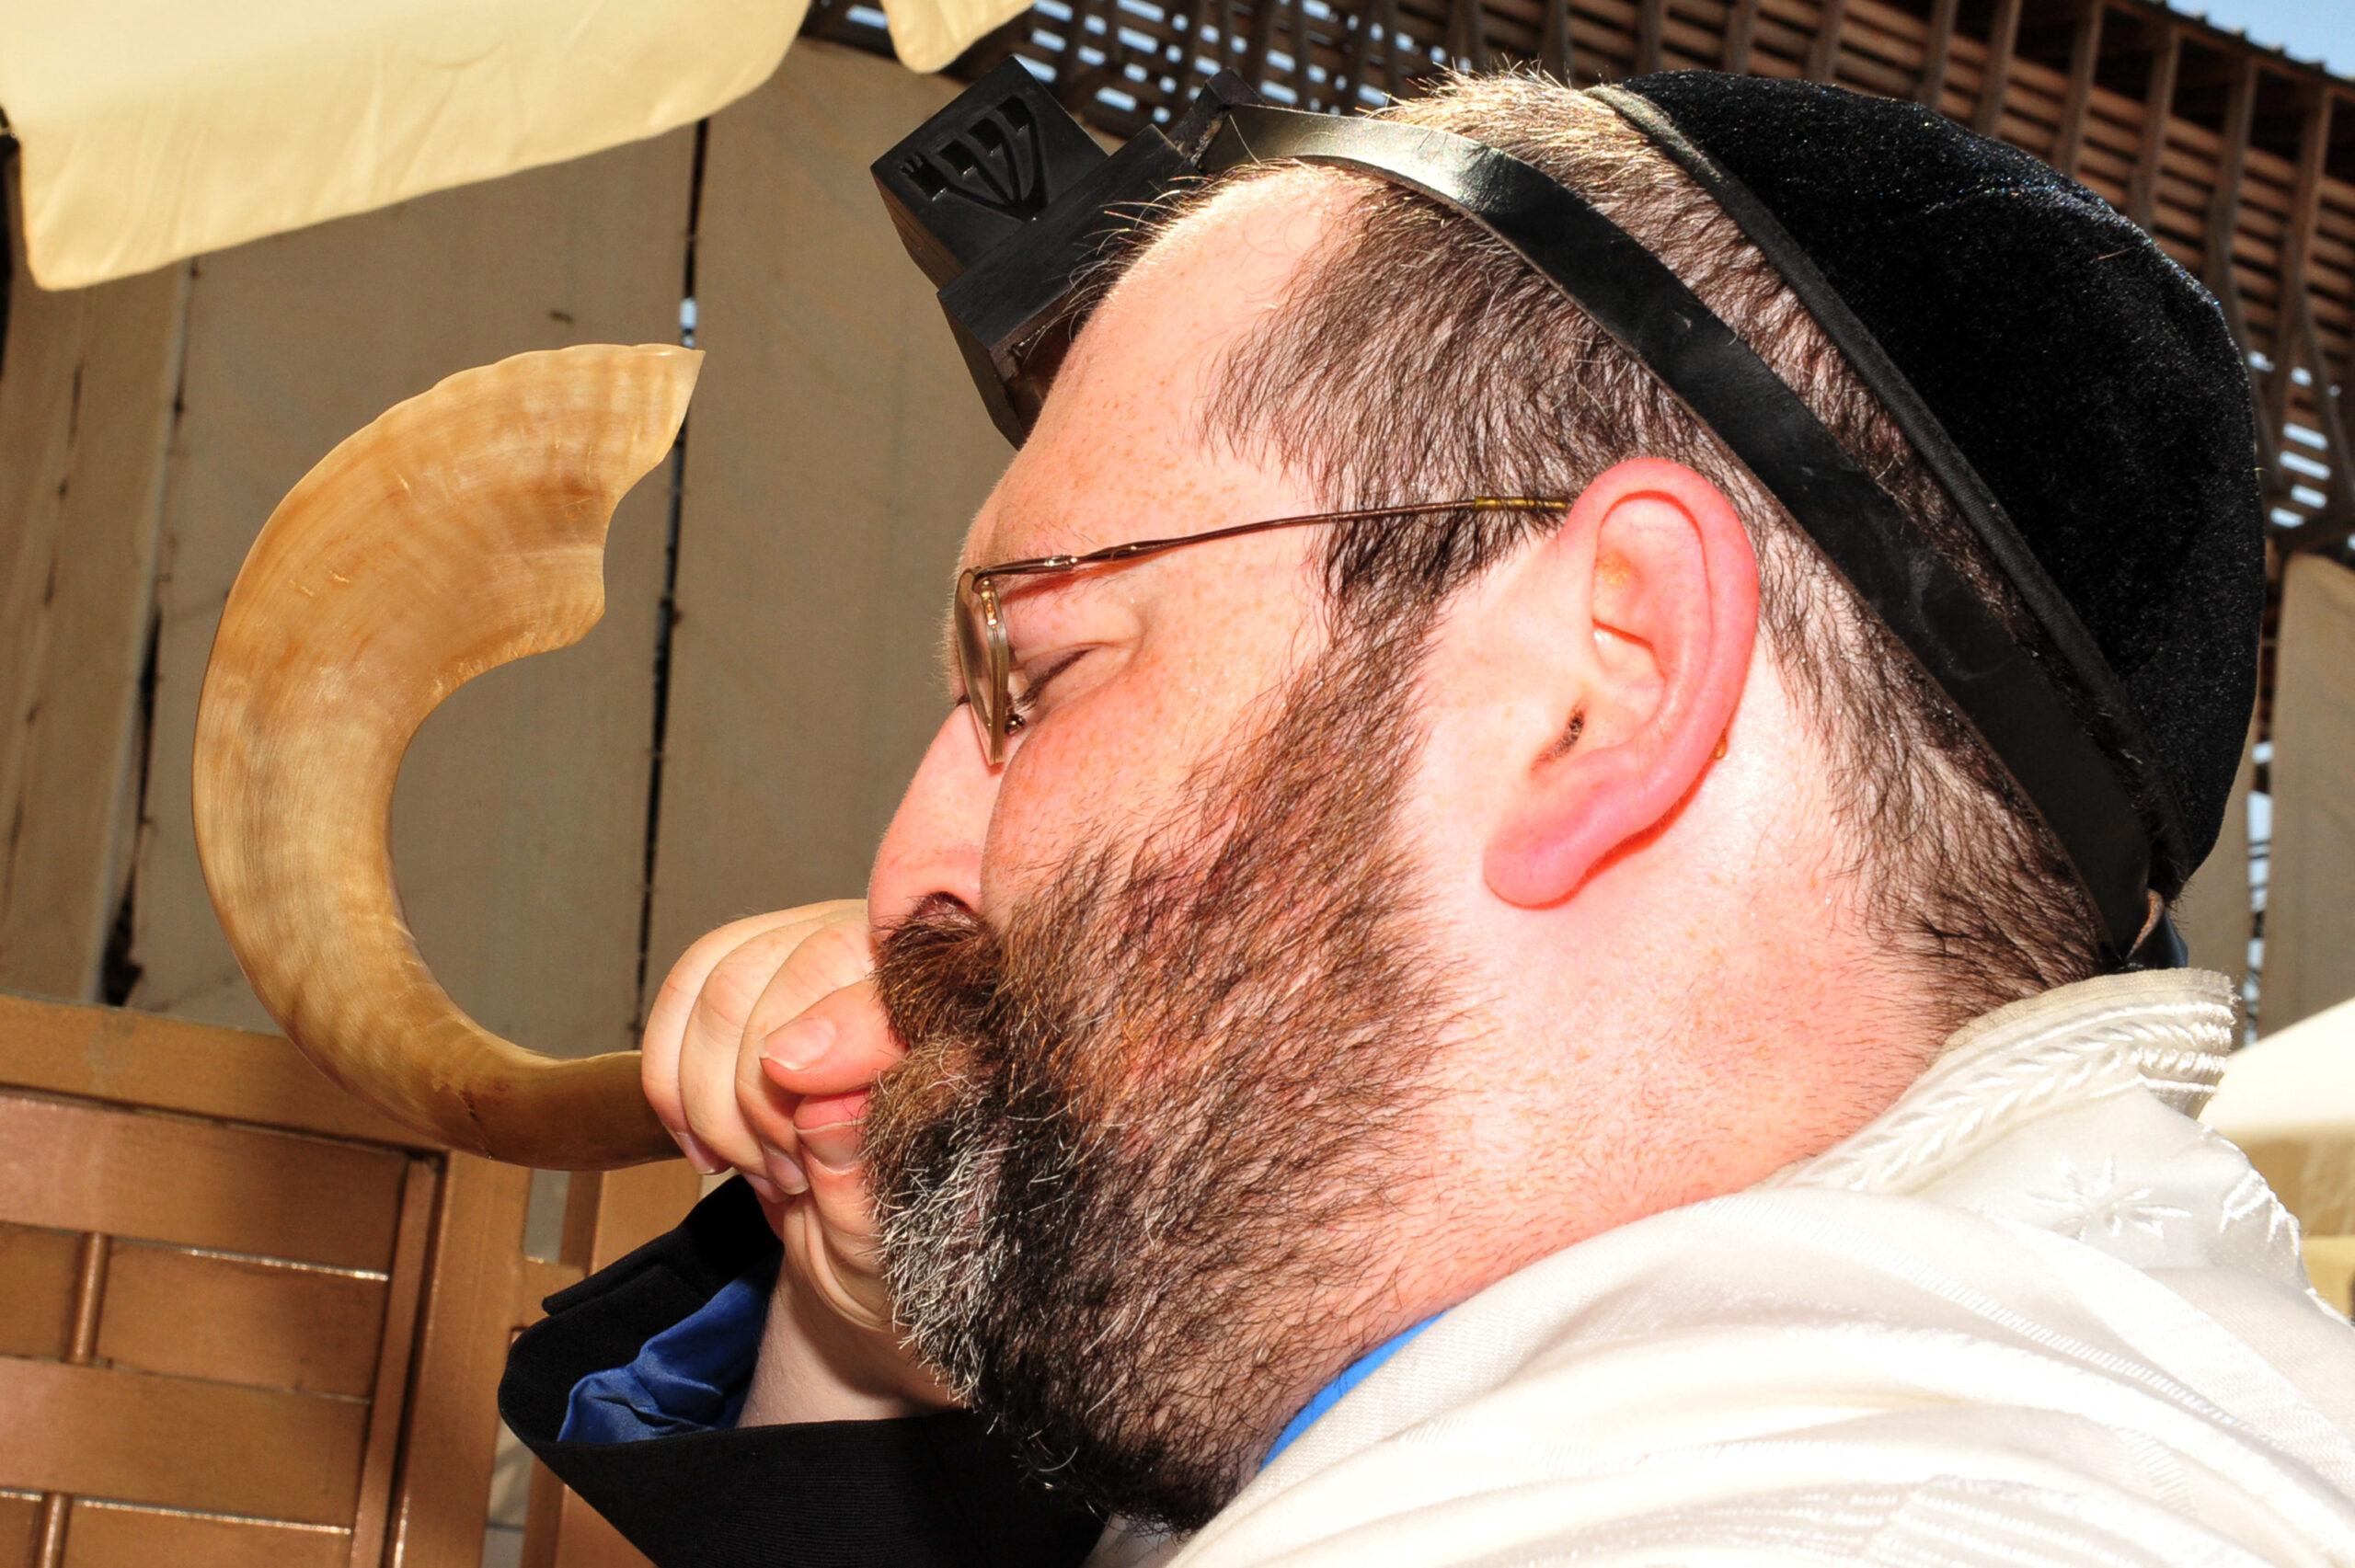 Jewish man blowing the Shofar at the Kotel on September 22 2008 in Jerusalem, Israel.It's a horn used for Jewish religious purposes on Rosh Hashanah and Yom Kippur Jewish Holidays